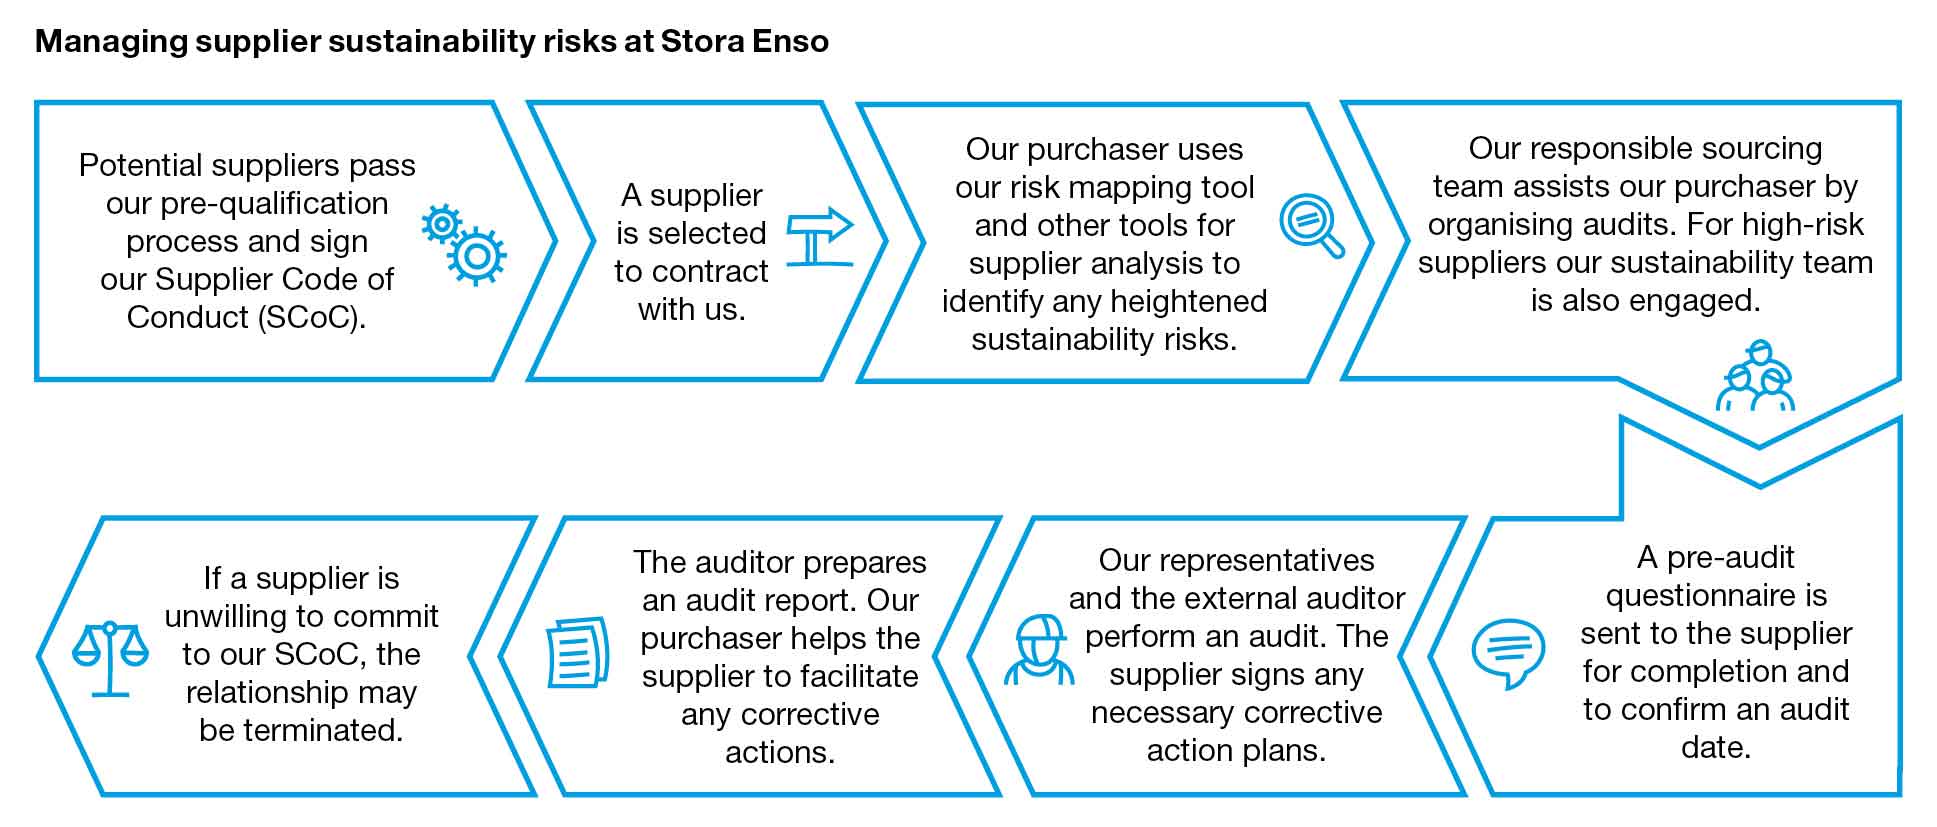 Supplier sustainability risks at stora enso